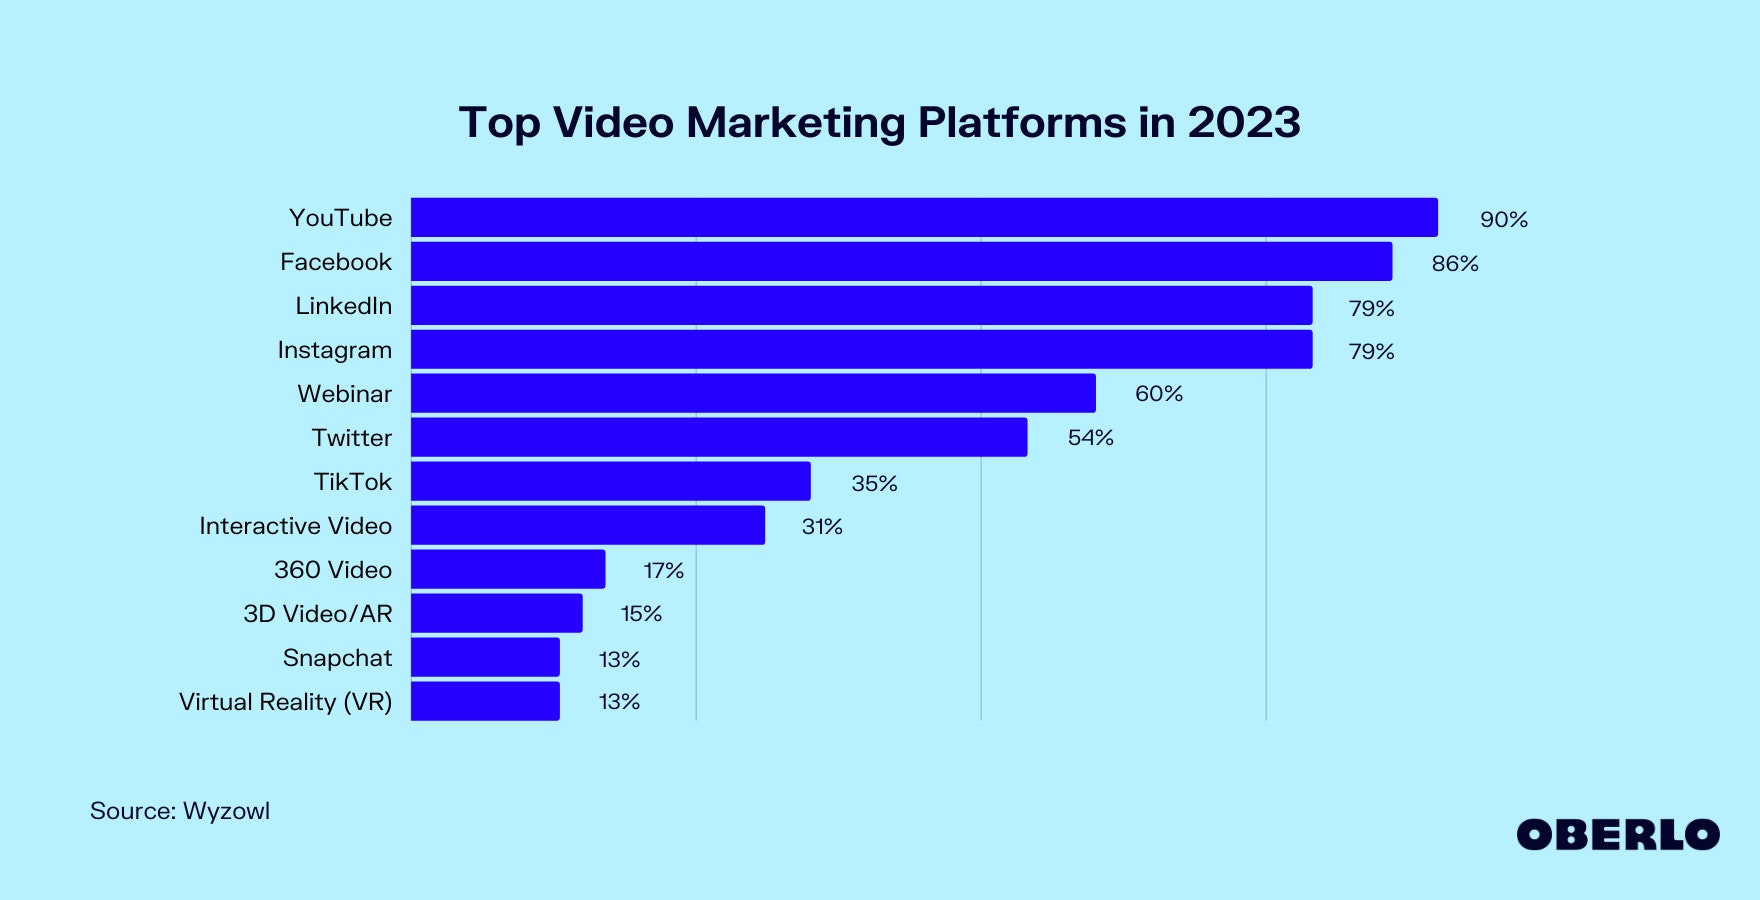 Chart showing the Top Video Marketing Platforms in 2023